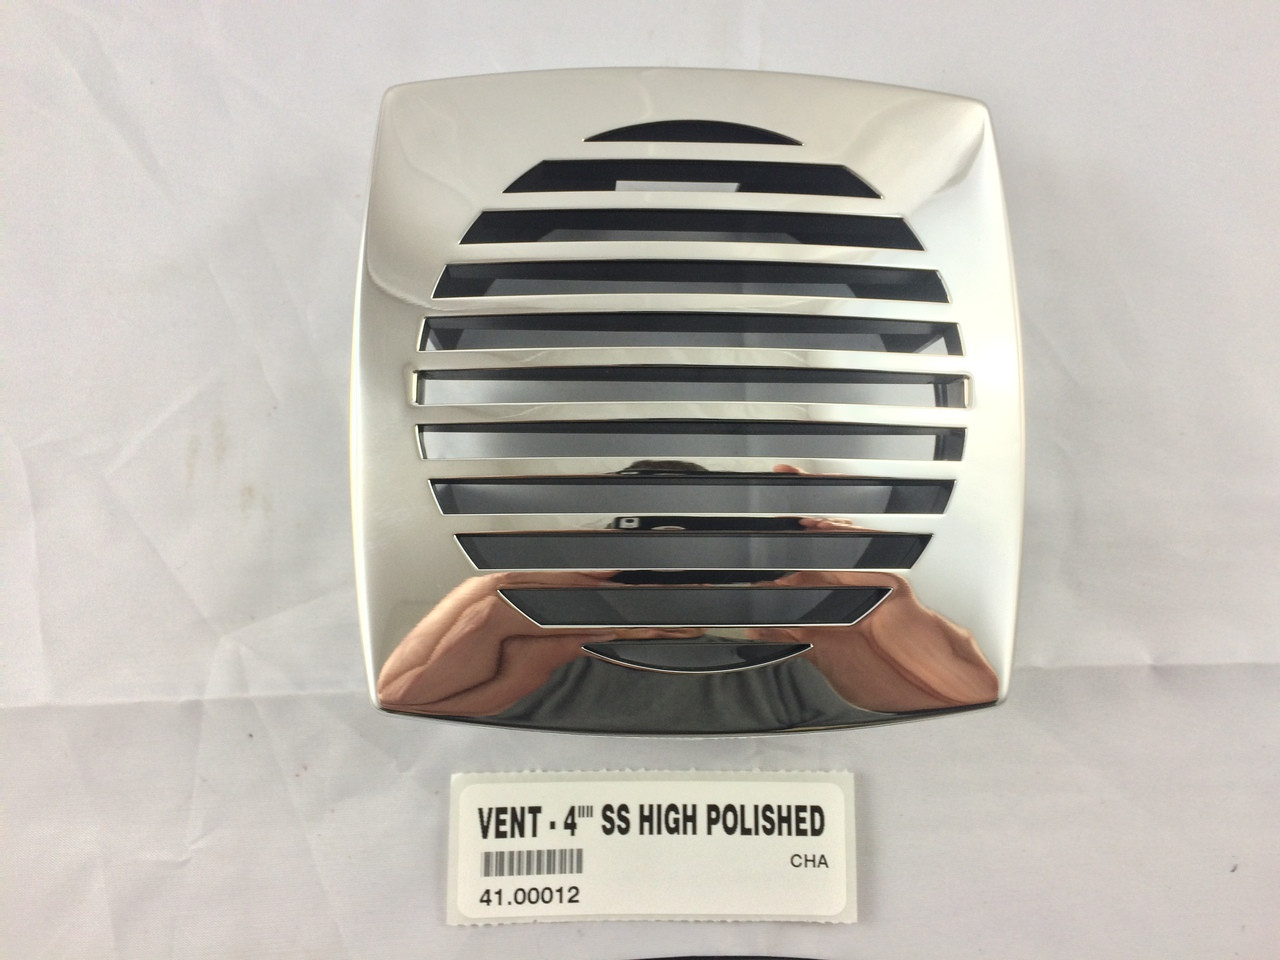 VENT - 4" CHROME HIGH POLISHED *In Stock & Ready To Ship!